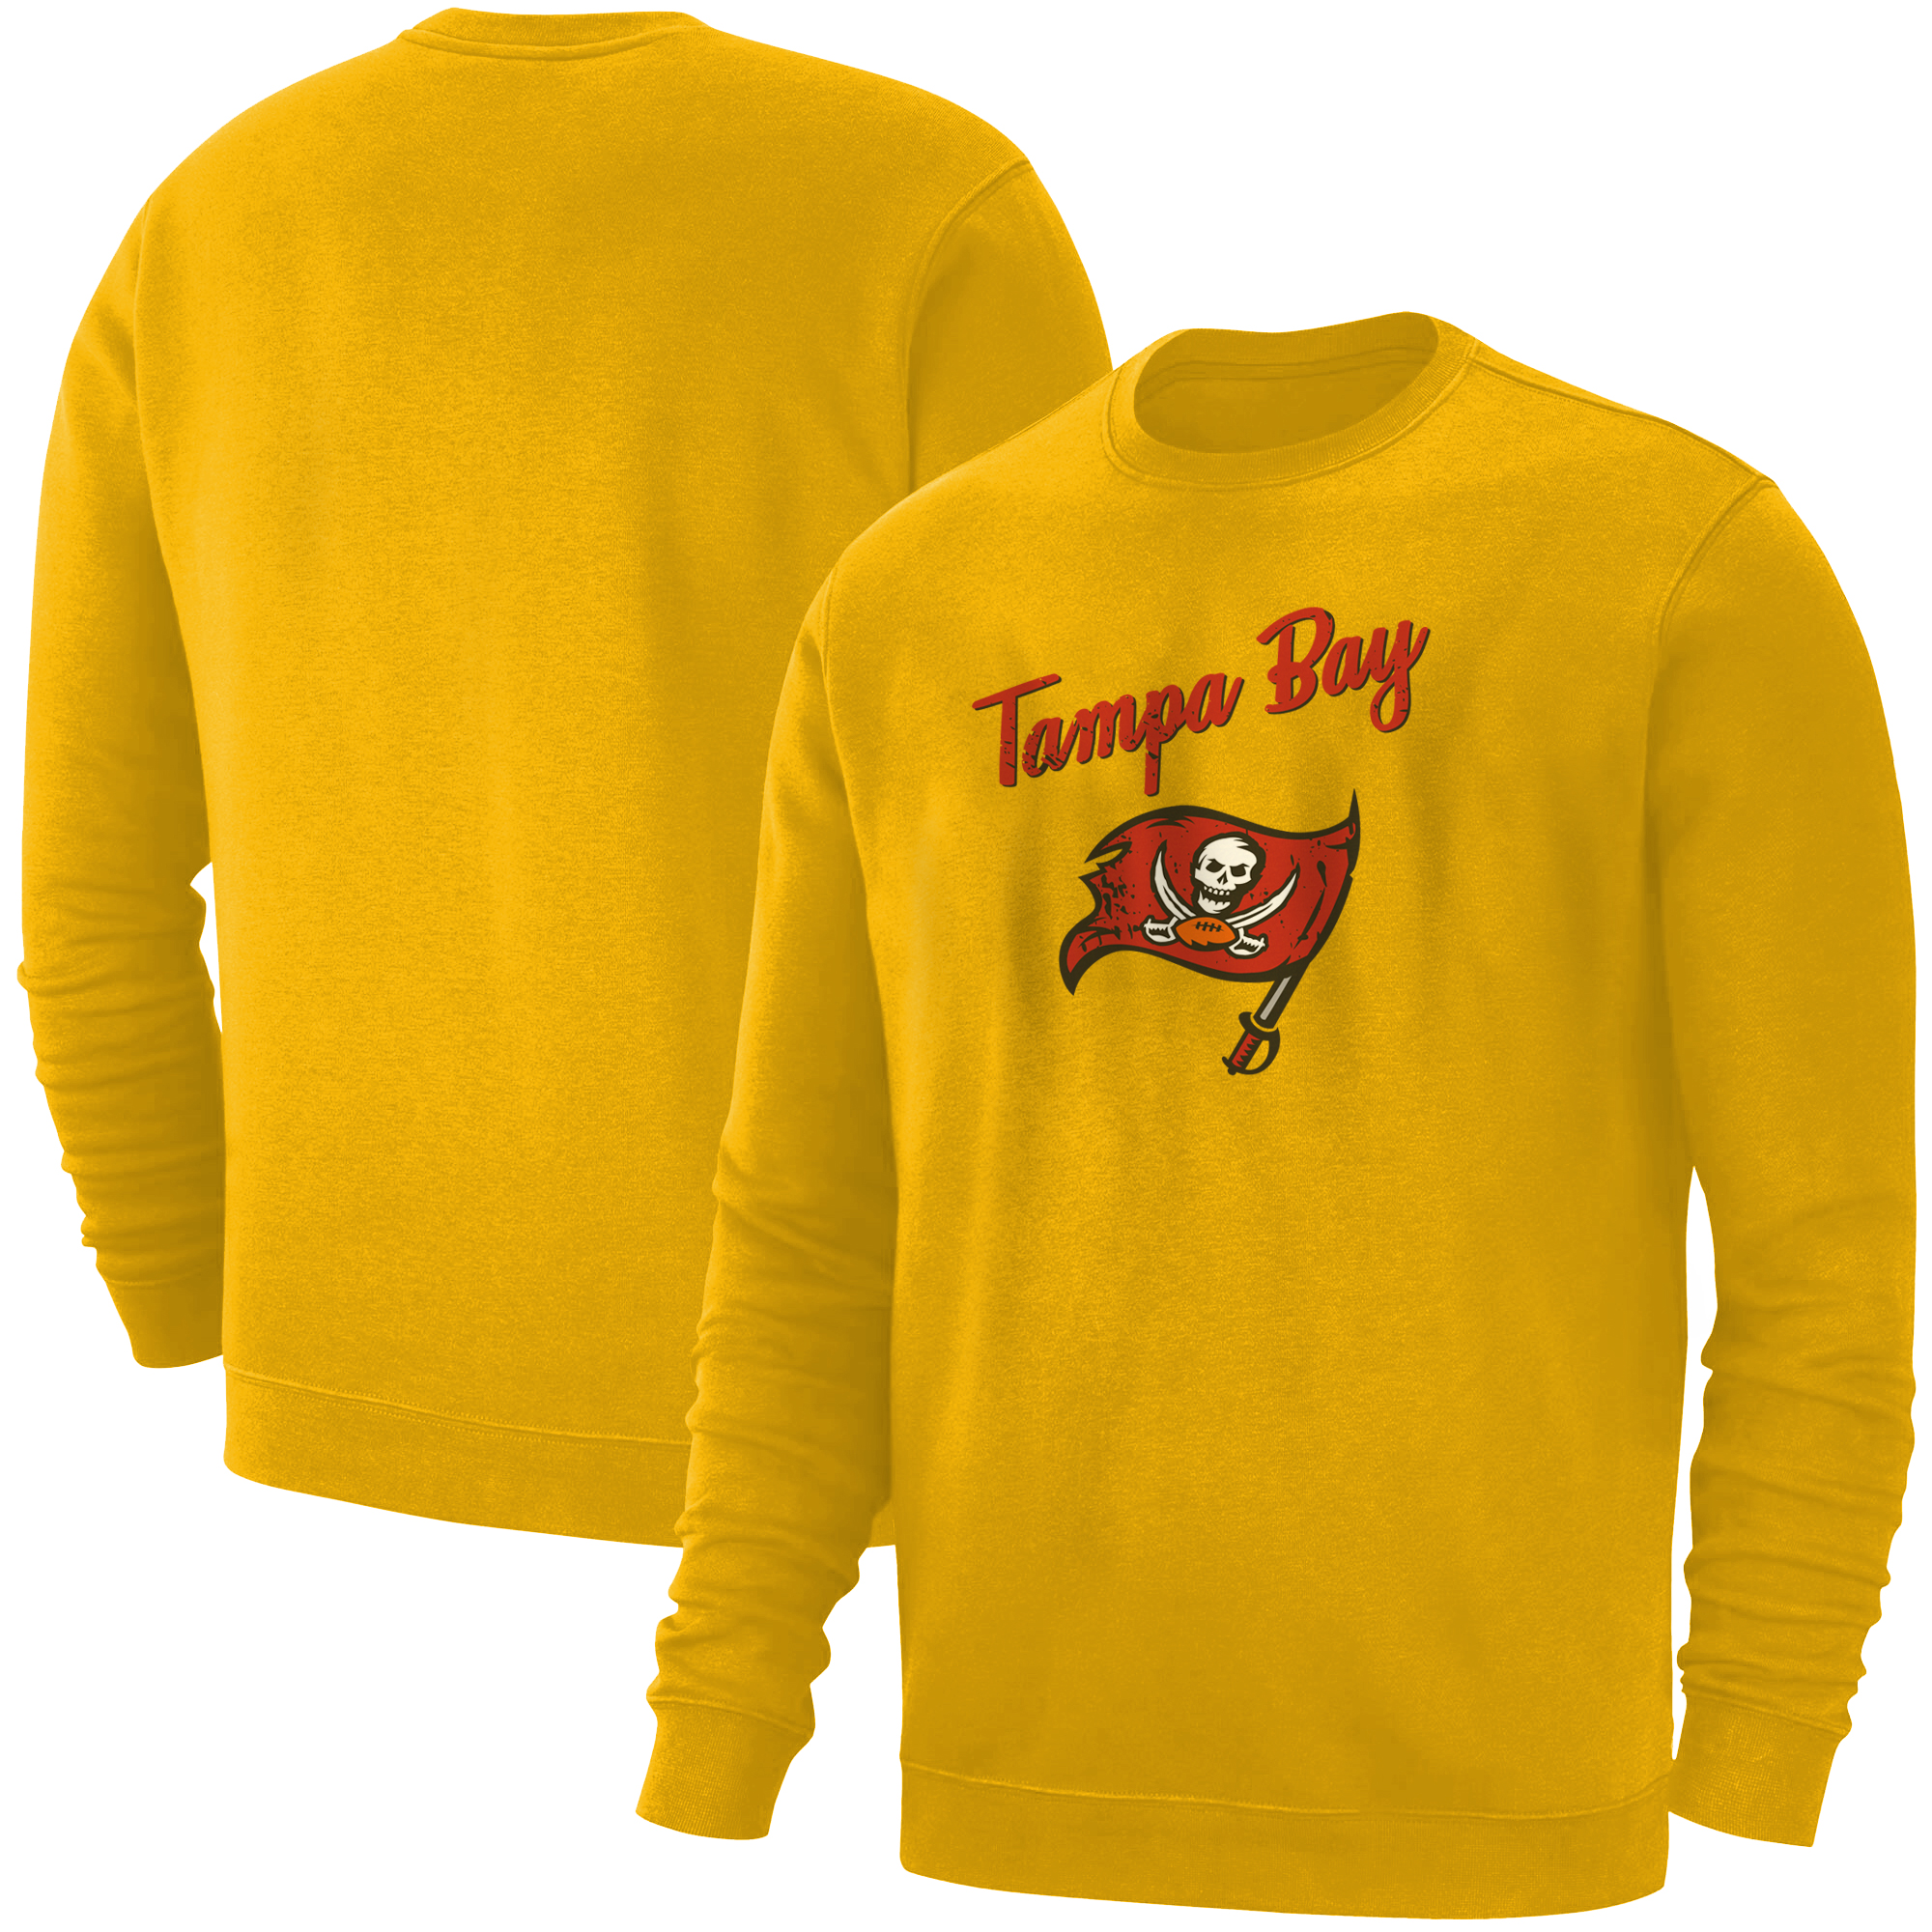 Tampa Bay Buccaneers Basic (BSC-YLW-6019-BAY)